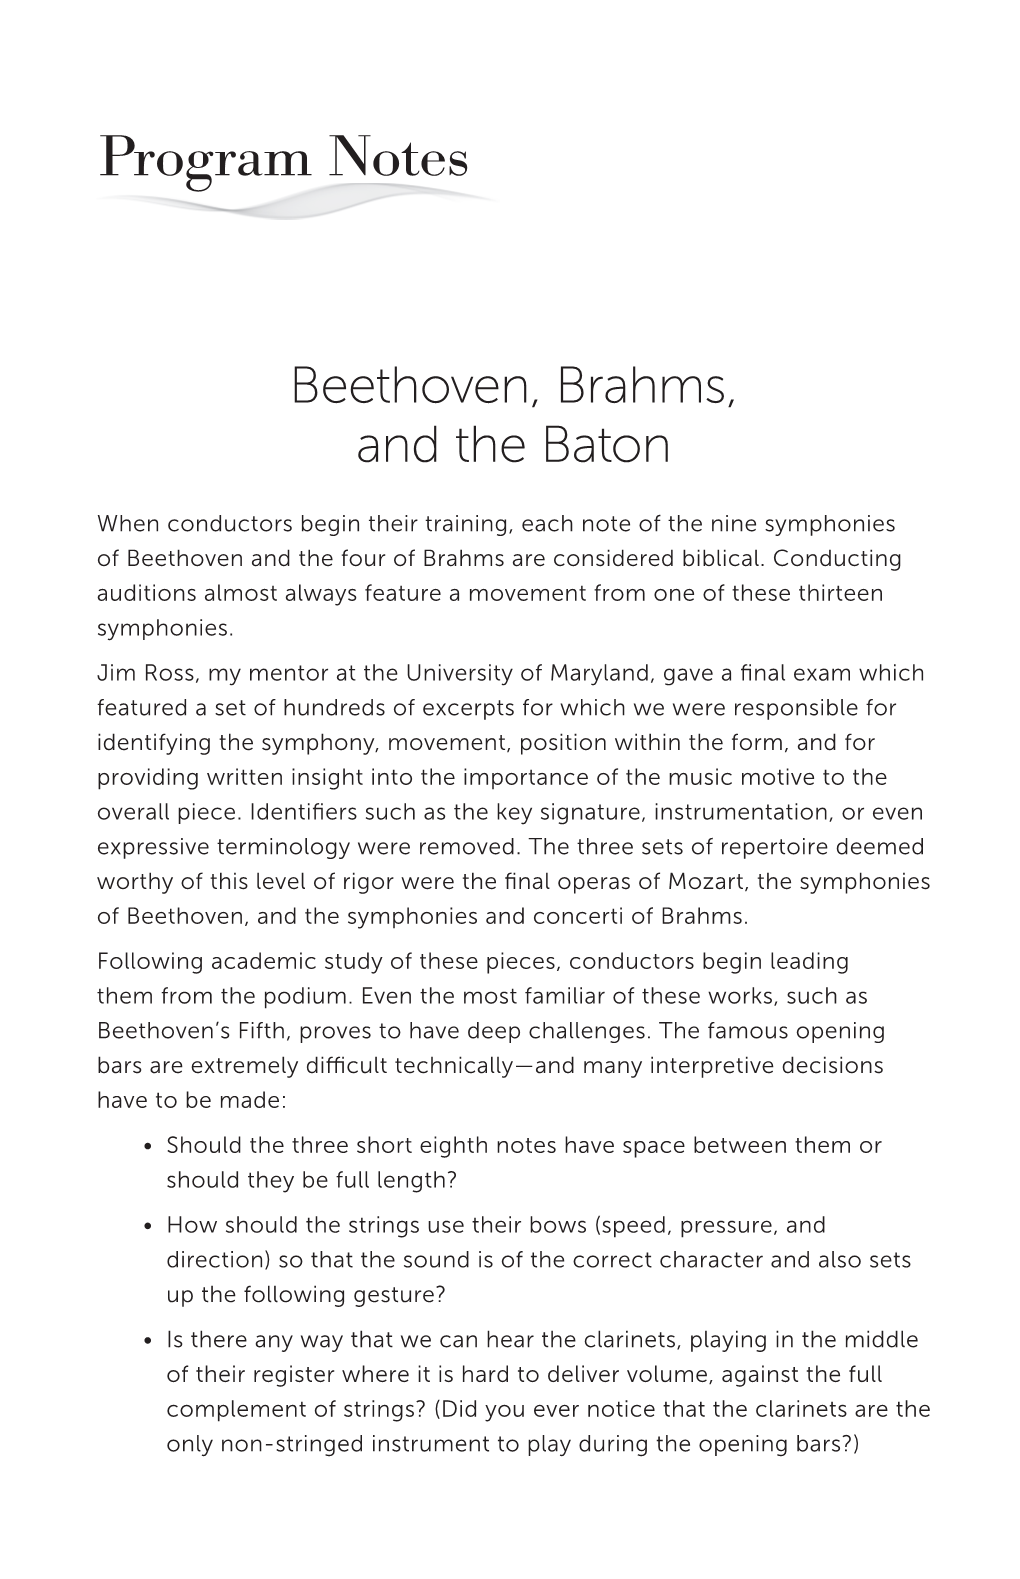 Beethoven's Fifth Program Notes